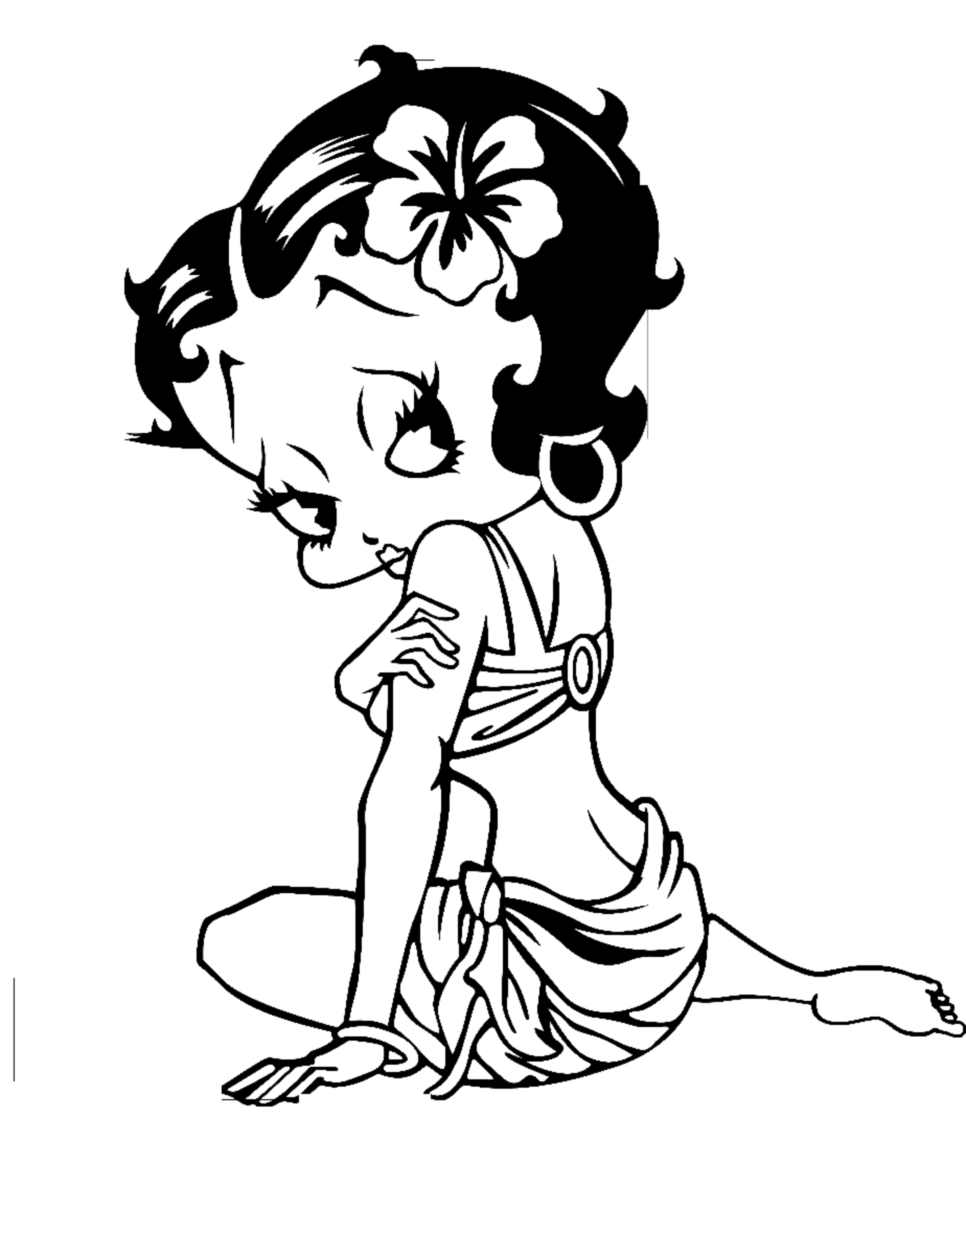 Betty Boop image to color